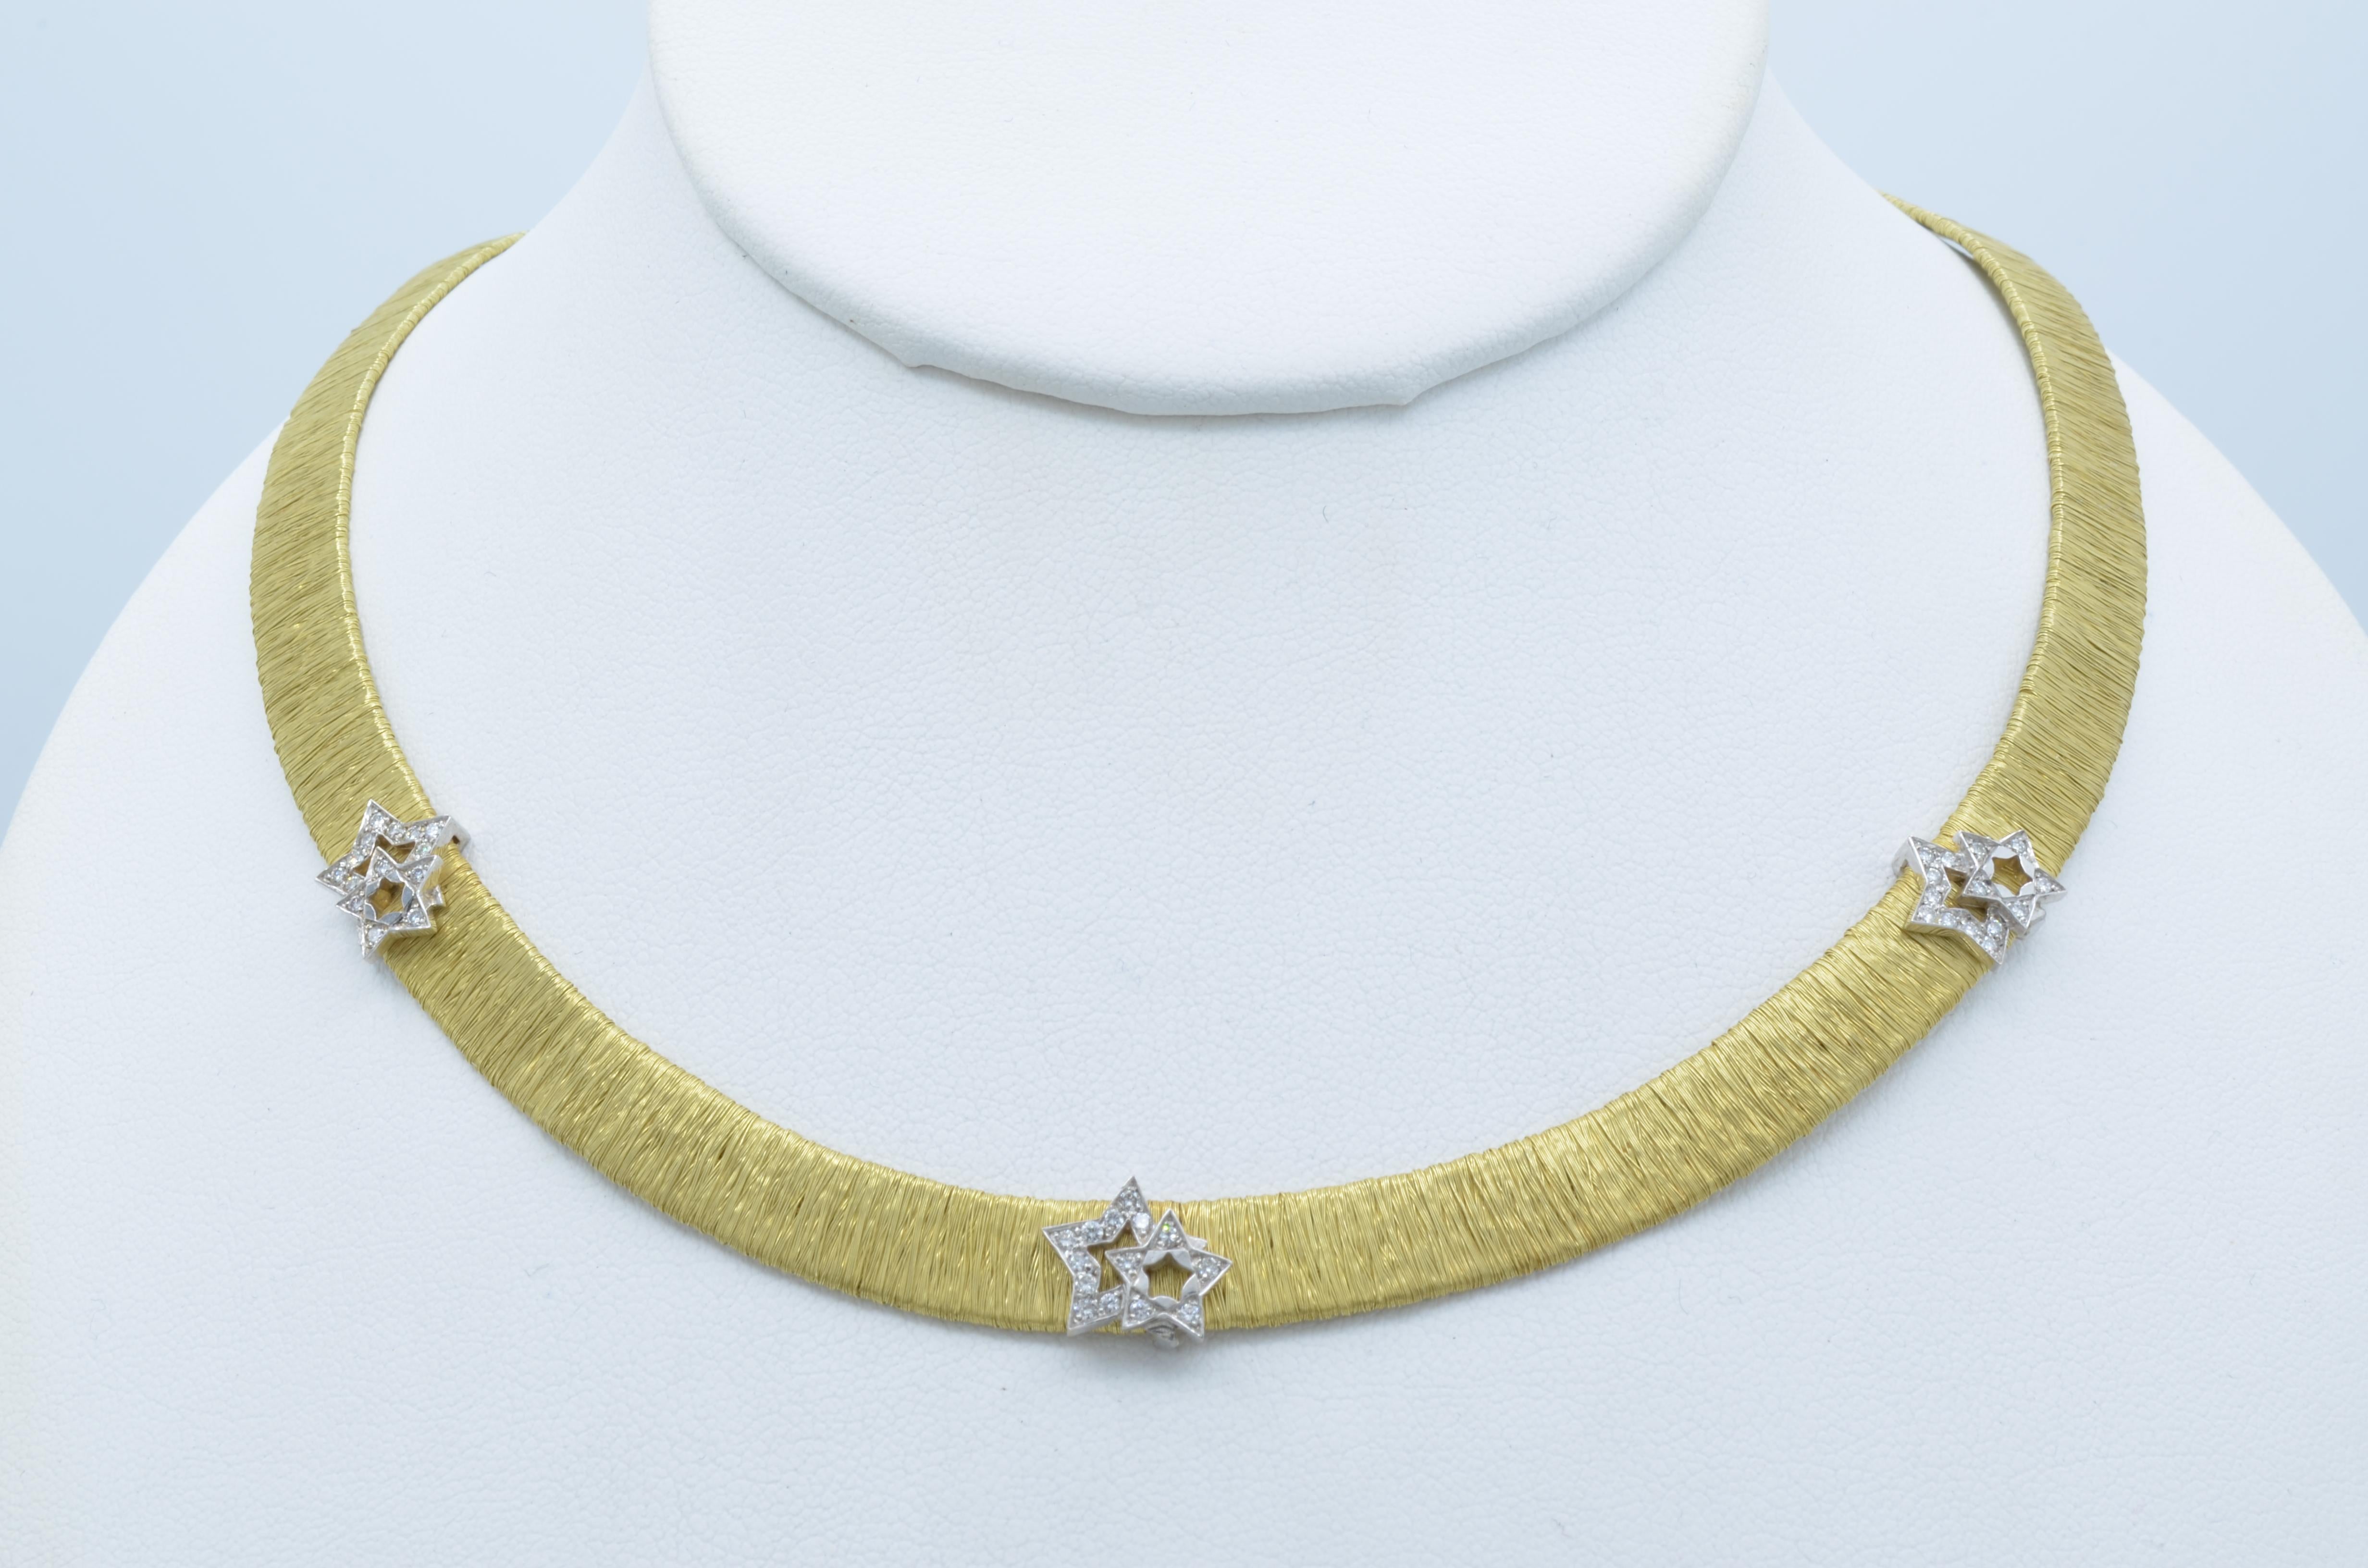 It's the trend again, in the manner of some very famous Italian Jeweler this a soft necklace in 18k gold mesh with some sparkling diamond double stars. As you can see on the picture with black back ground the necklace is embracing any form and